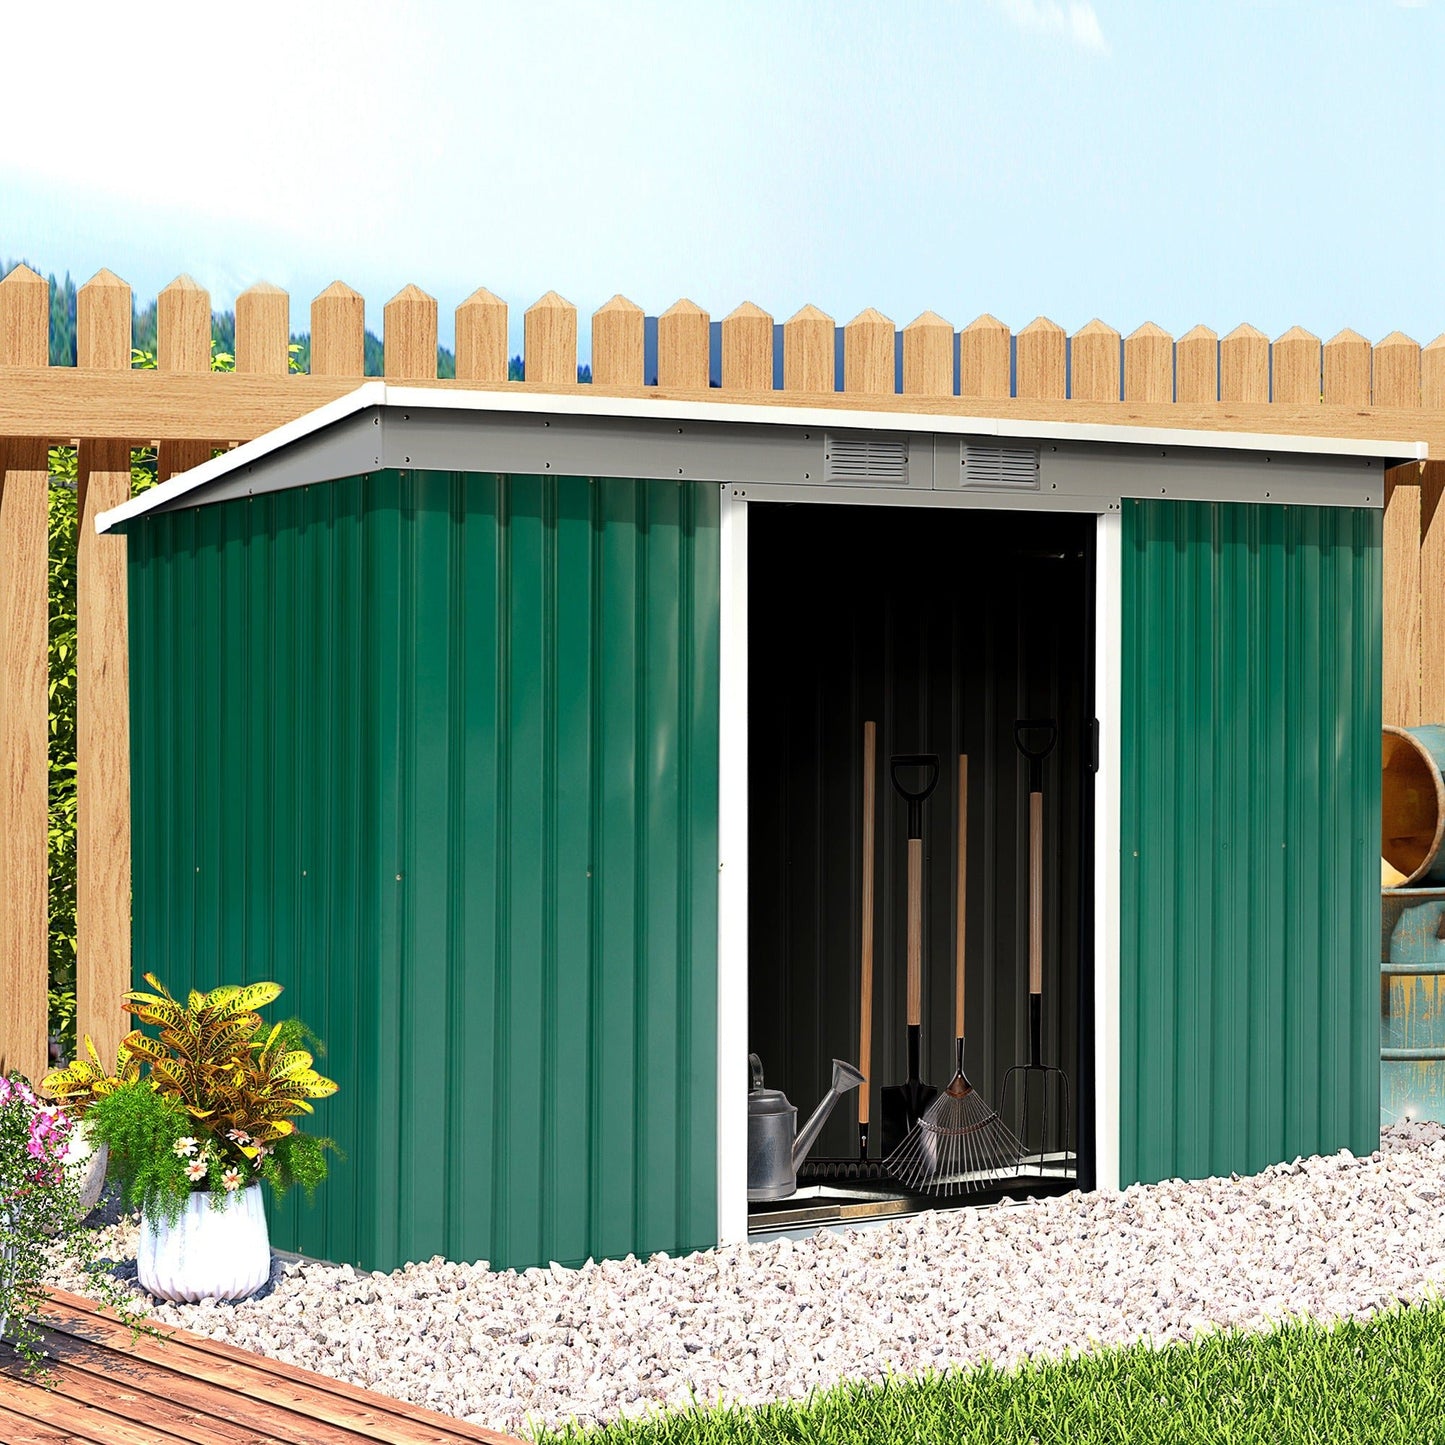 Outdoor and Garden-9' x 4.5' x 5.5' Outdoor Rust Resistant Metal Garden Vented Storage Shed Metal Tool Storage House - Green/White - Outdoor Style Company